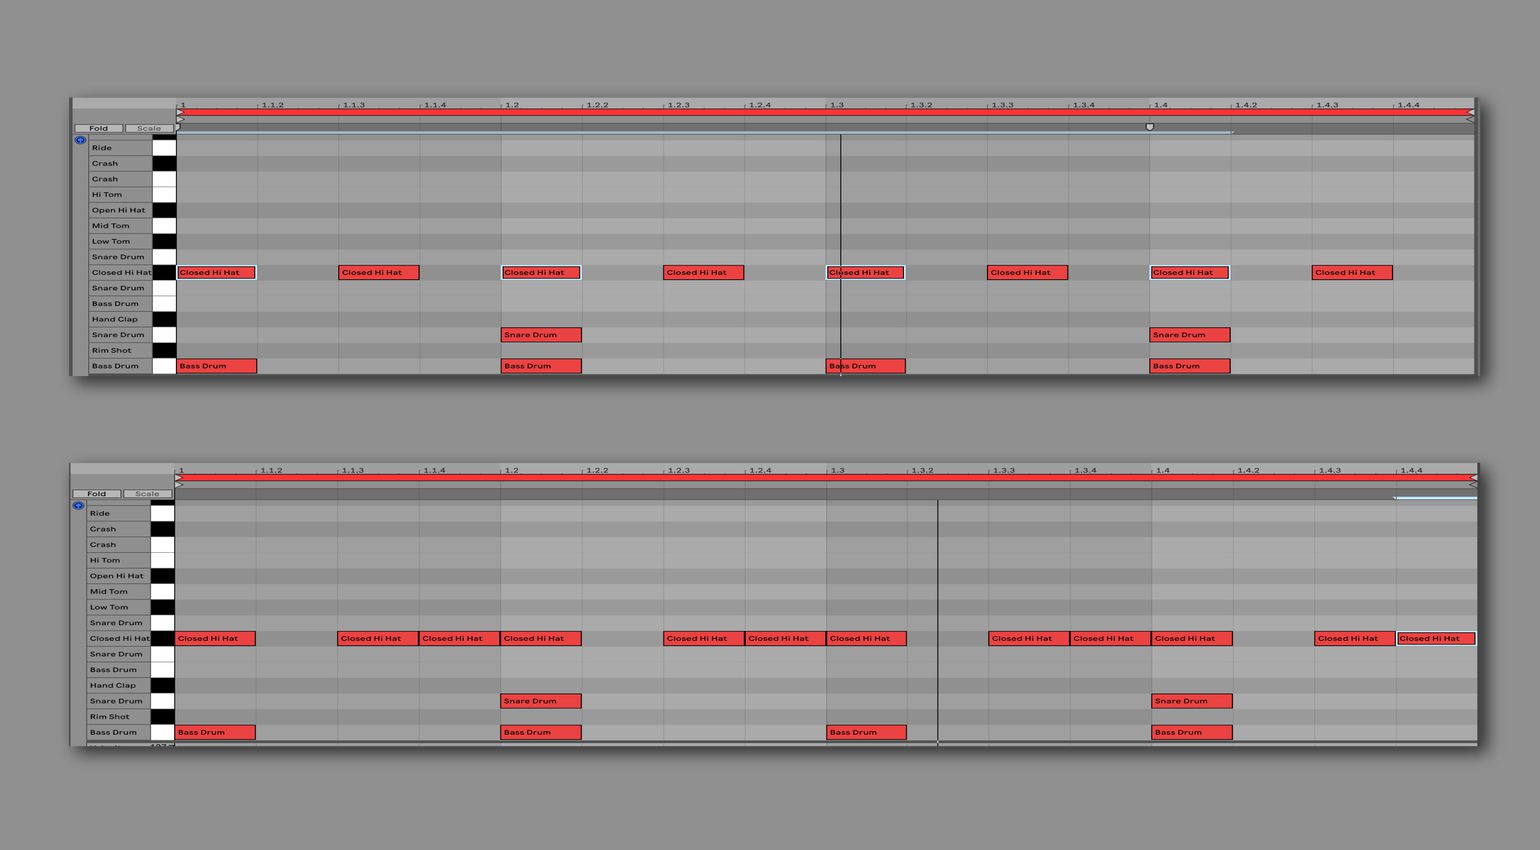 Same Kick and Snare pattern, different Hihat rhythms - wildly different groove! 